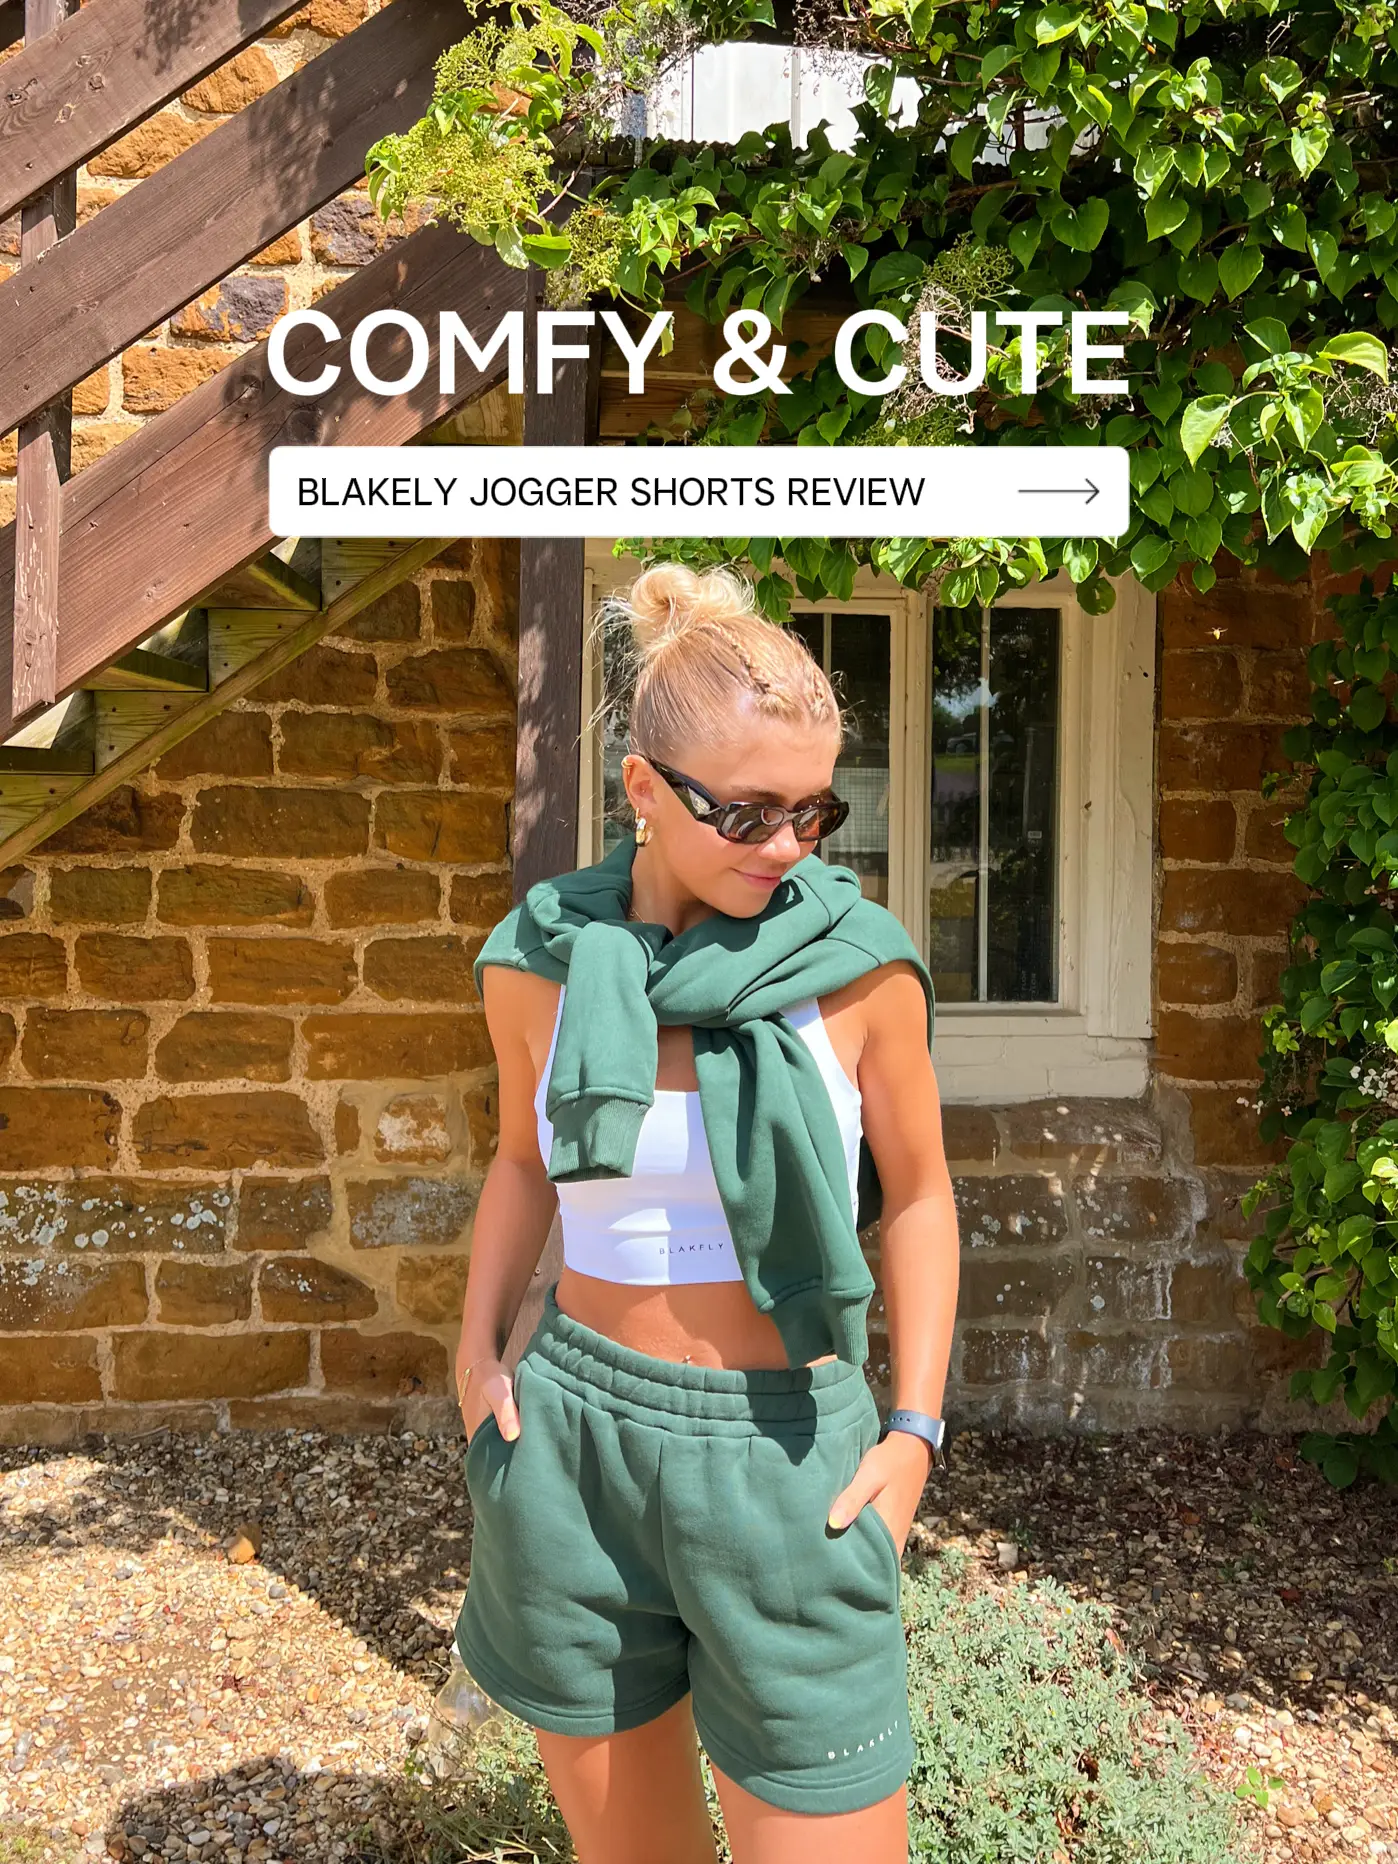 Blakely jogger shorts review ✏️, Gallery posted by shaunacannell